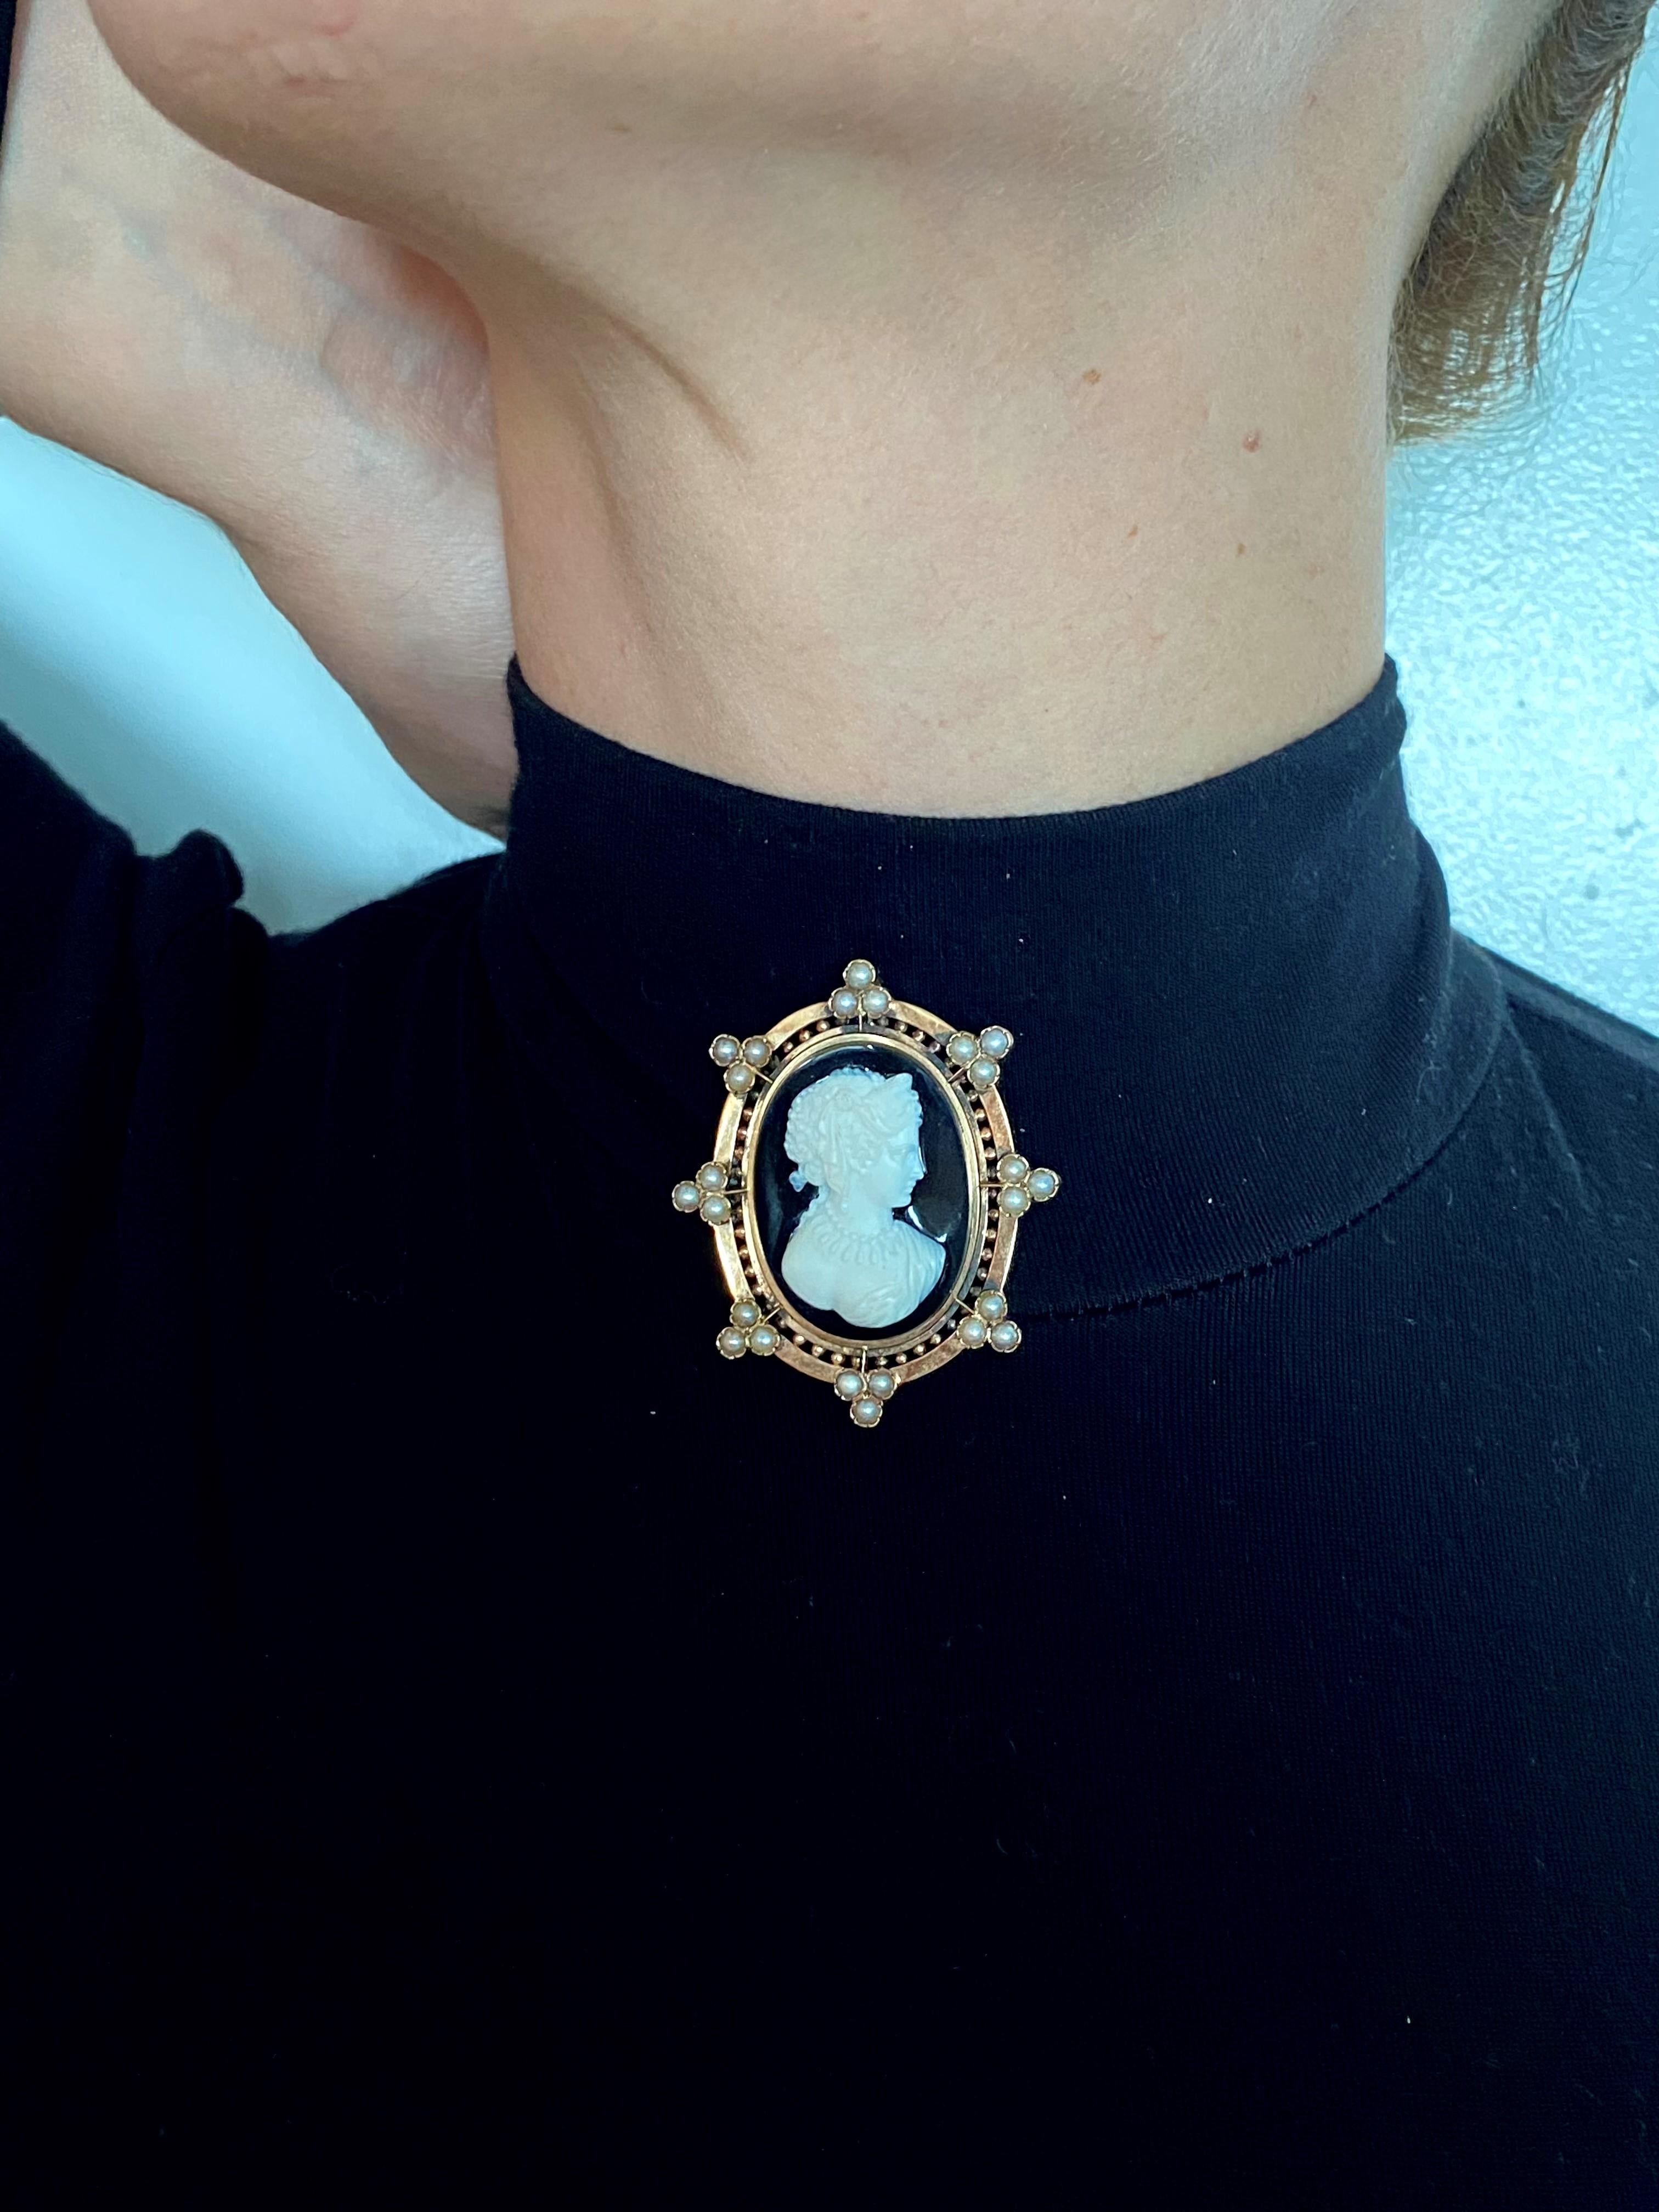 Victorian 1870 Etruscan Revival Agate Cameo Pendant In 15KT Gold Natural Pearls 1